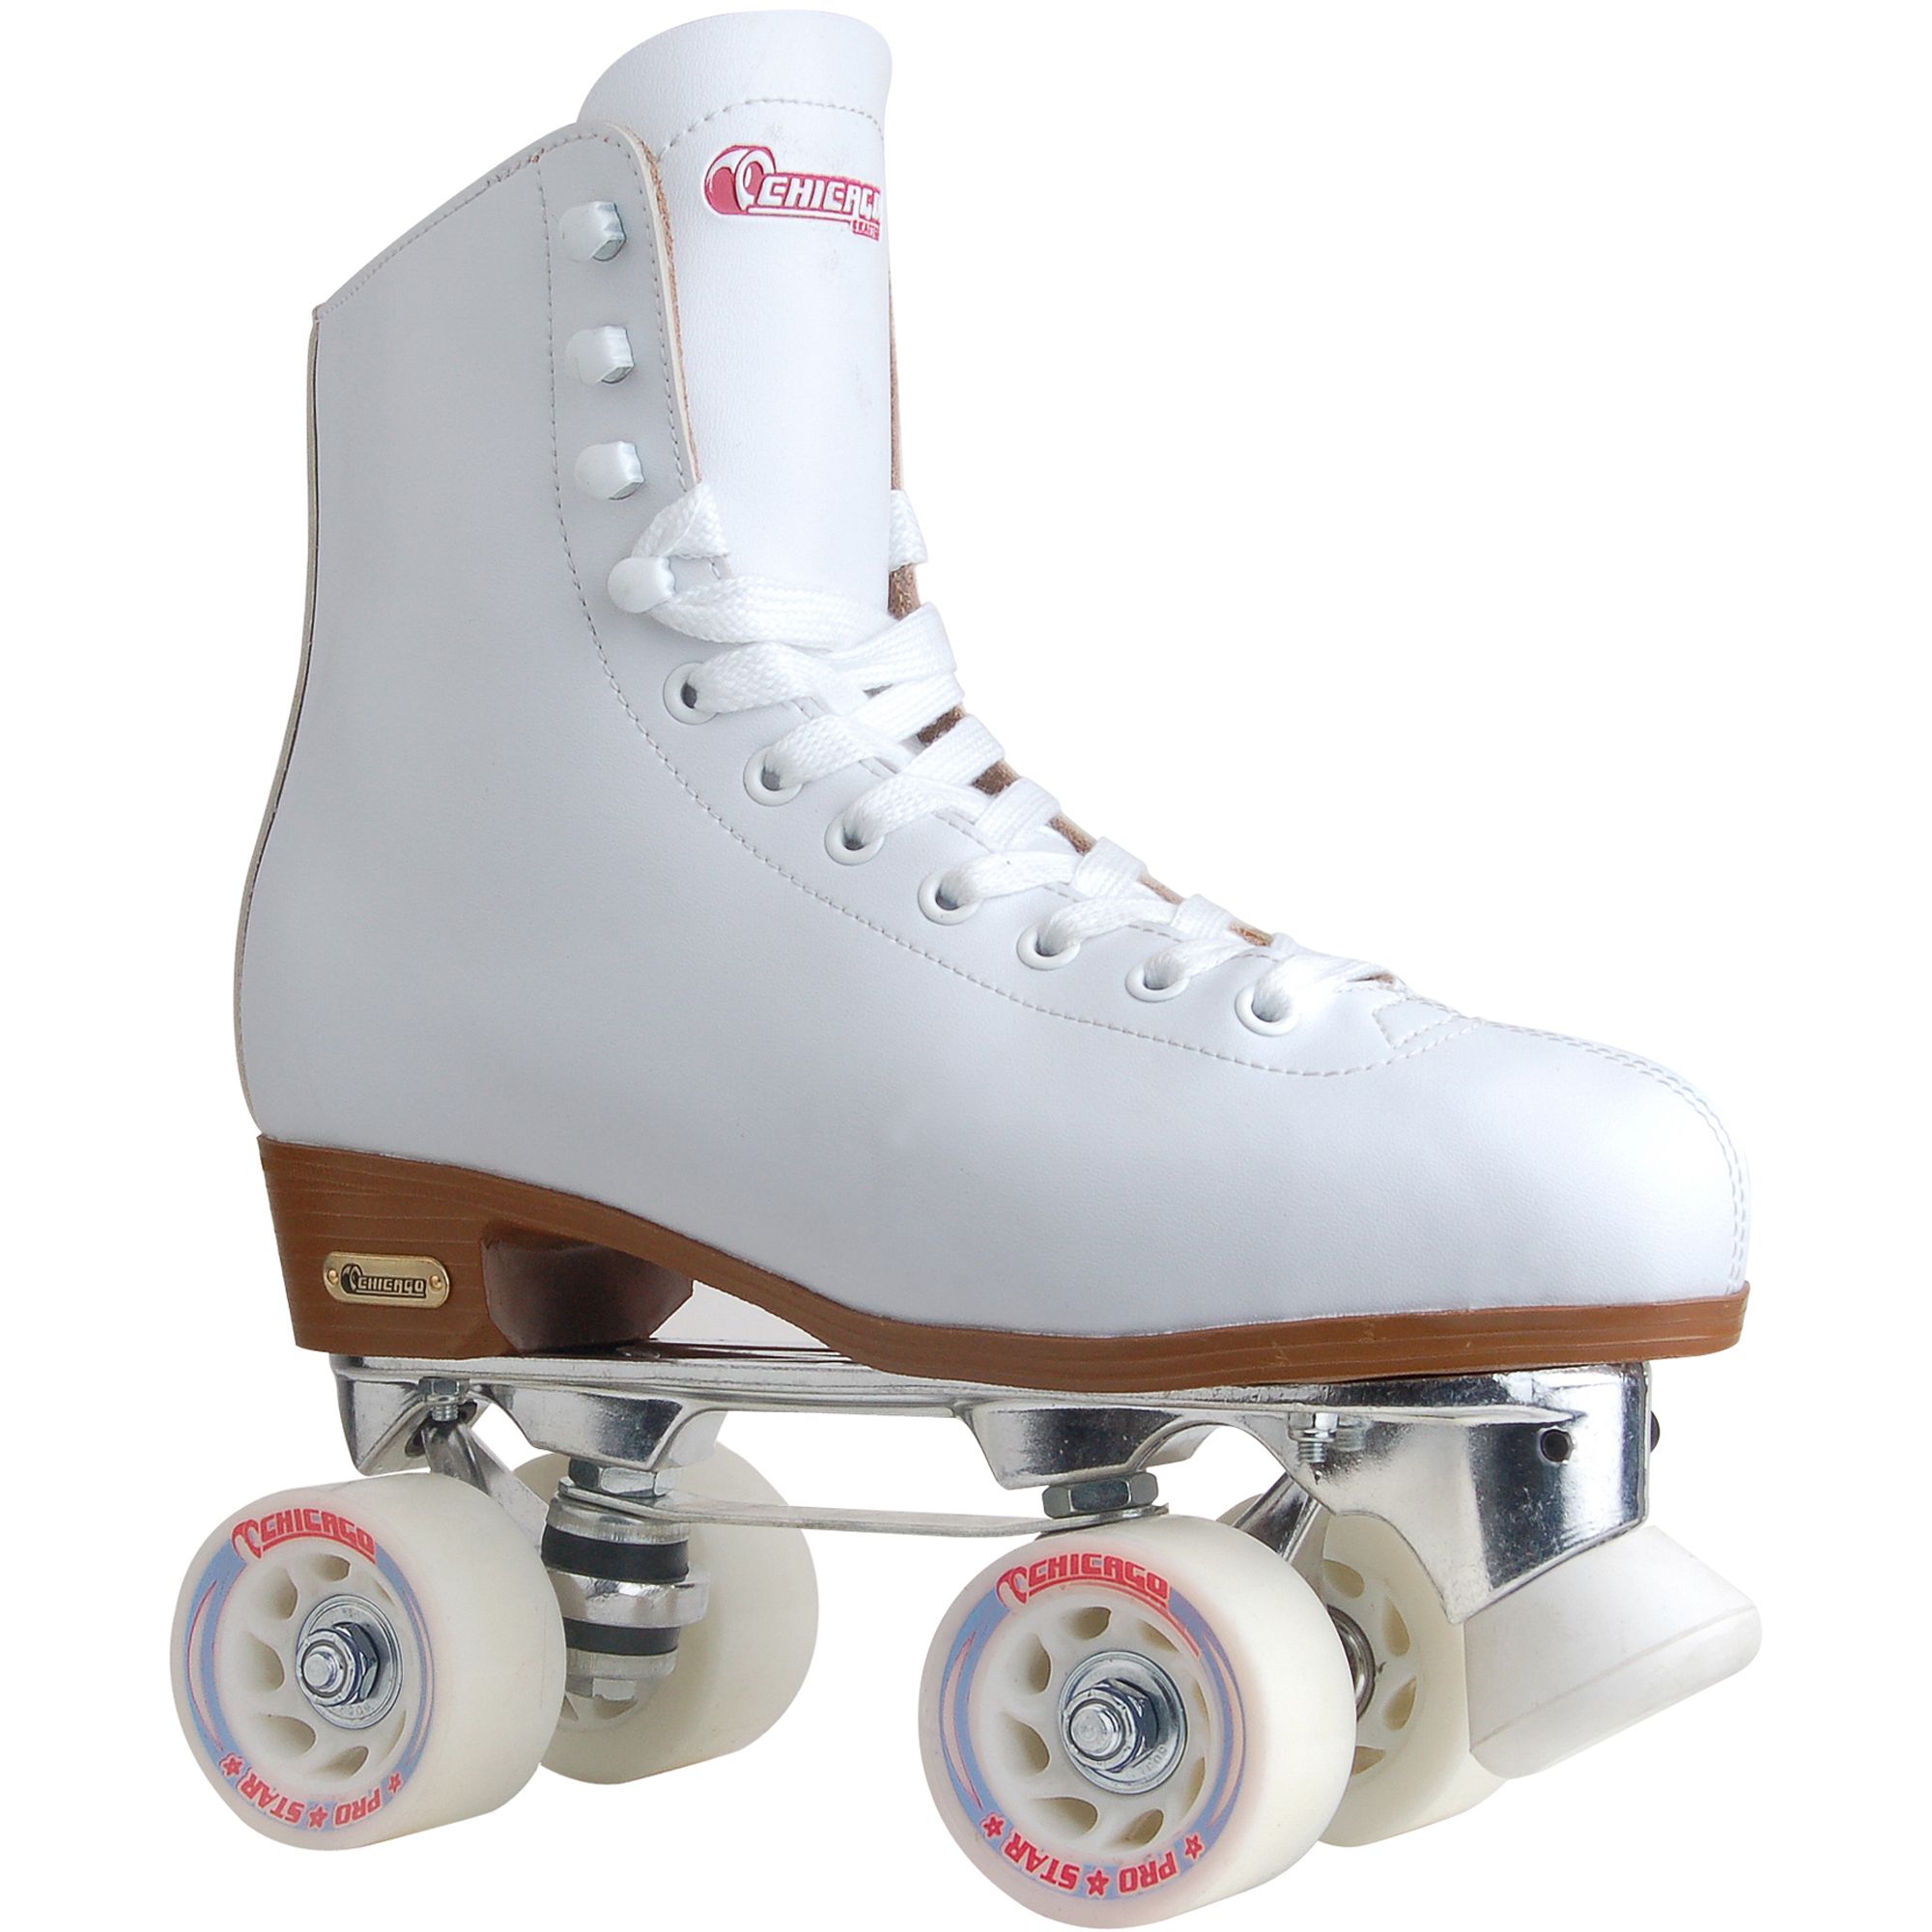 Chicago Ladies Leather Lined Rink Skate White